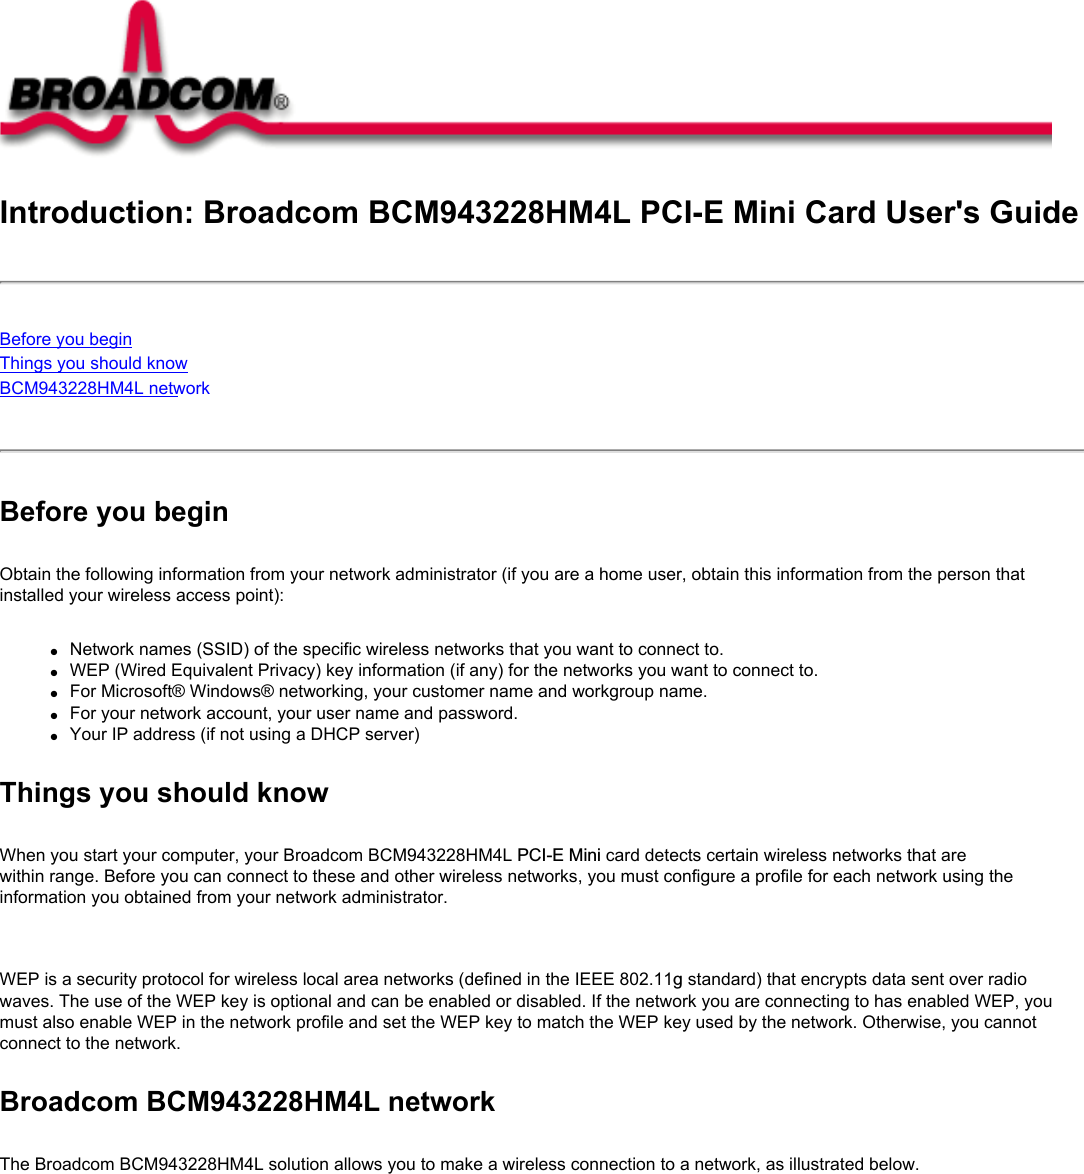 Introduction: Broadcom BCM943228HM4L PCI-E Mini Card User&apos;s GuideBefore you beginThings you should knowBCM943228HM4L network Before you beginObtain the following information from your network administrator (if you are a home user, obtain this information from the person that installed your wireless access point):●     Network names (SSID) of the specific wireless networks that you want to connect to.●     WEP (Wired Equivalent Privacy) key information (if any) for the networks you want to connect to.●     For Microsoft® Windows® networking, your customer name and workgroup name.●     For your network account, your user name and password.●     Your IP address (if not using a DHCP server)Things you should knowWhen you start your computer, your Broadcom BCM943228HM4L PCI-E Mini card detects certain wireless networks that are within range. Before you can connect to these and other wireless networks, you must configure a profile for each network using the information you obtained from your network administrator.   WEP is a security protocol for wireless local area networks (defined in the IEEE 802.11g standard) that encrypts data sent over radio waves. The use of the WEP key is optional and can be enabled or disabled. If the network you are connecting to has enabled WEP, you must also enable WEP in the network profile and set the WEP key to match the WEP key used by the network. Otherwise, you cannot connect to the network.Broadcom BCM943228HM4L networkThe Broadcom BCM943228HM4L solution allows you to make a wireless connection to a network, as illustrated below.